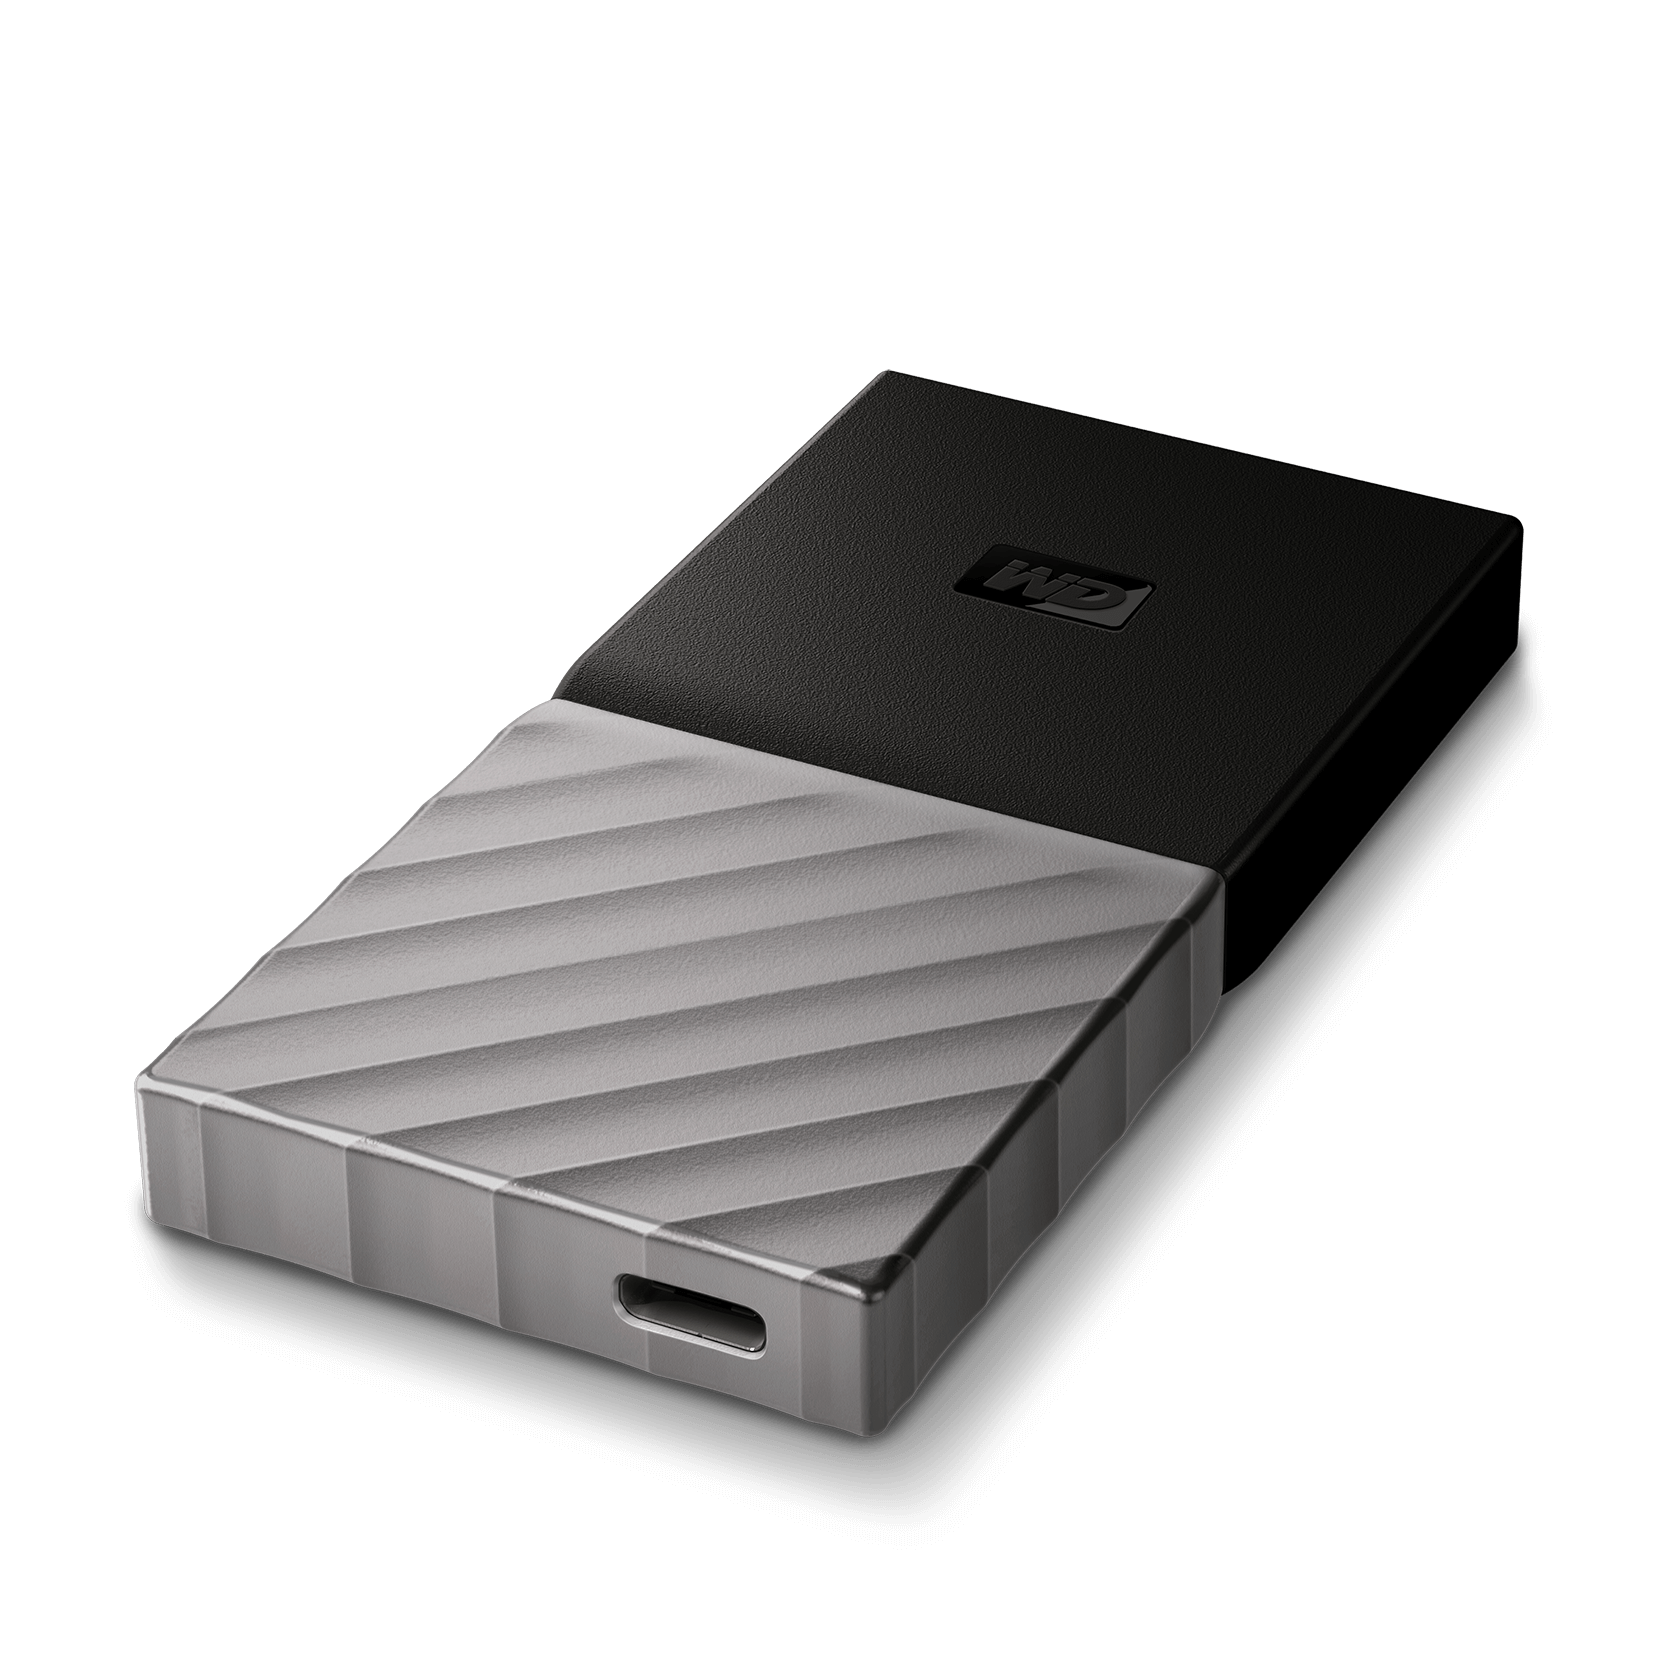 WD 256GB My Passport Portable SSD, External Solid State Drive, Read Speeds Up to 540 MB/s - WDBKVX2560PSL-WESN - image 5 of 7